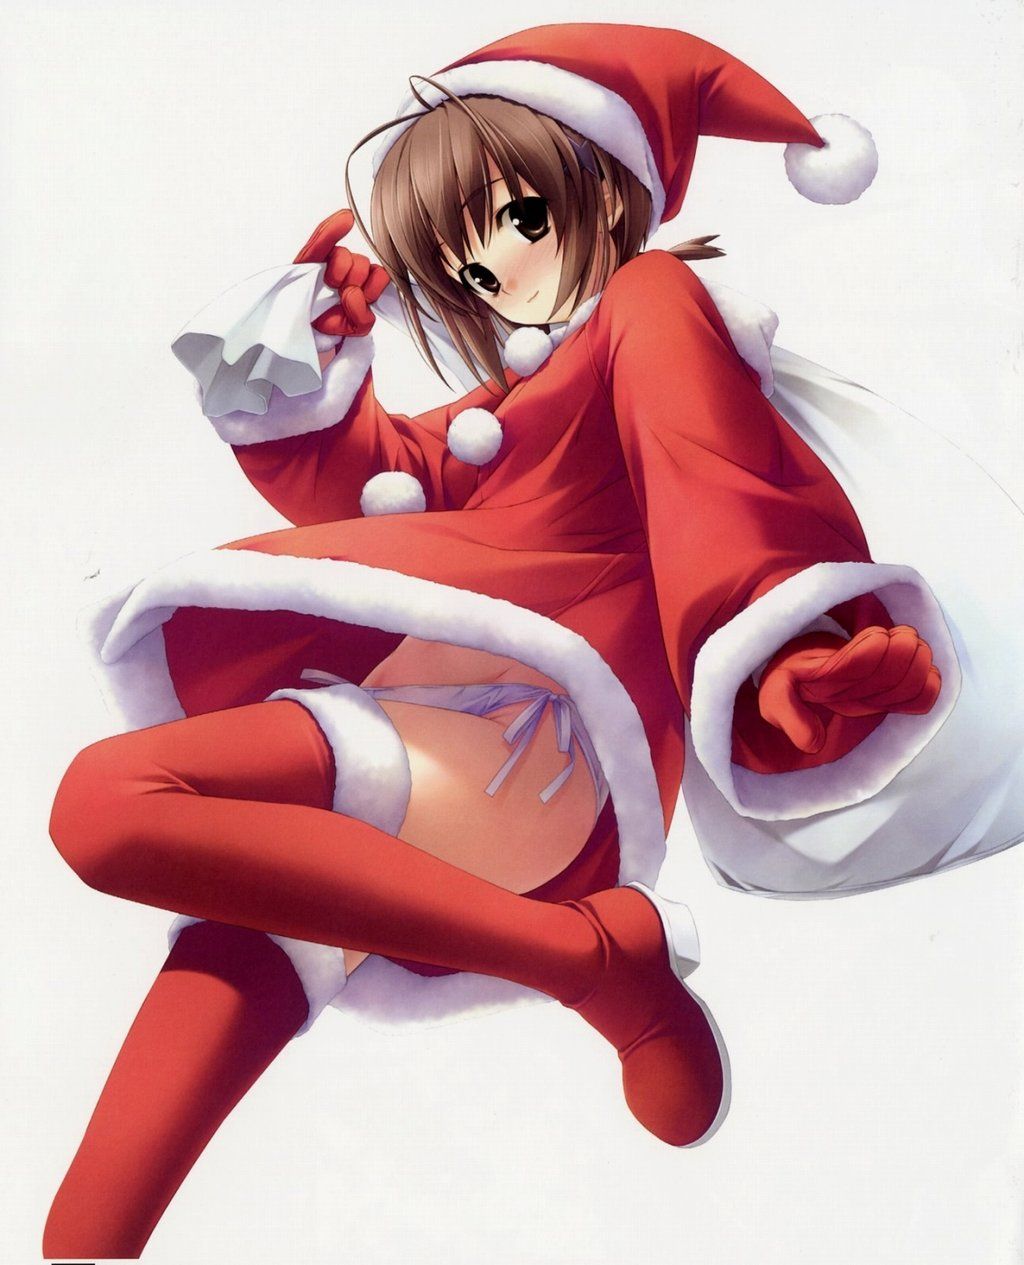 Naughty Girl Santa costume erotic in the serve of the night not have that image / no. 28 at night [Christmas 2: pictures] 20